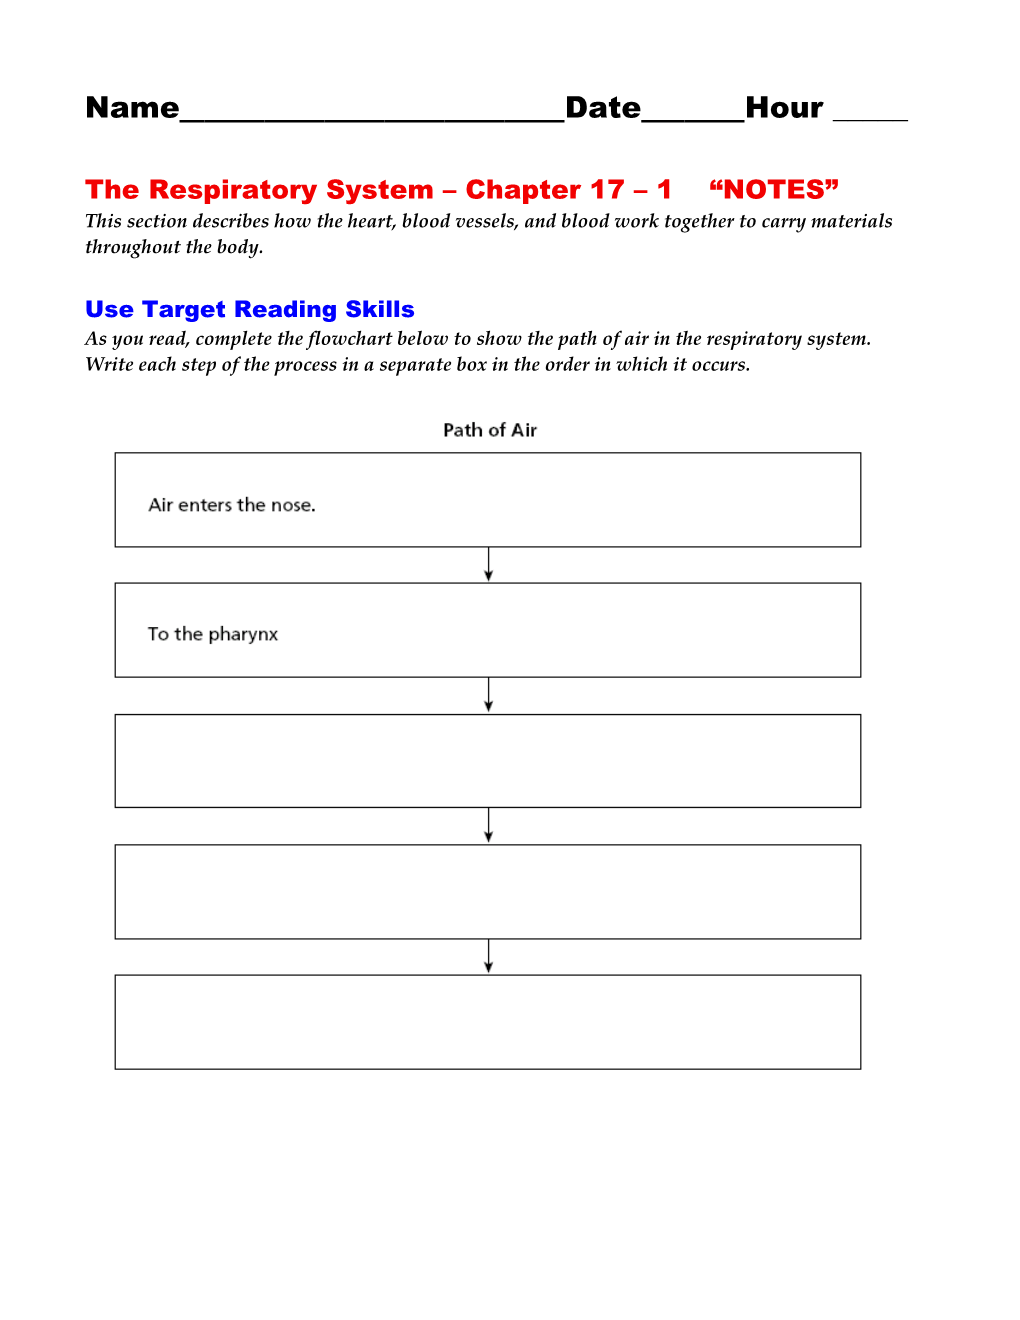 The Respiratory System Chapter 17 1 NOTES